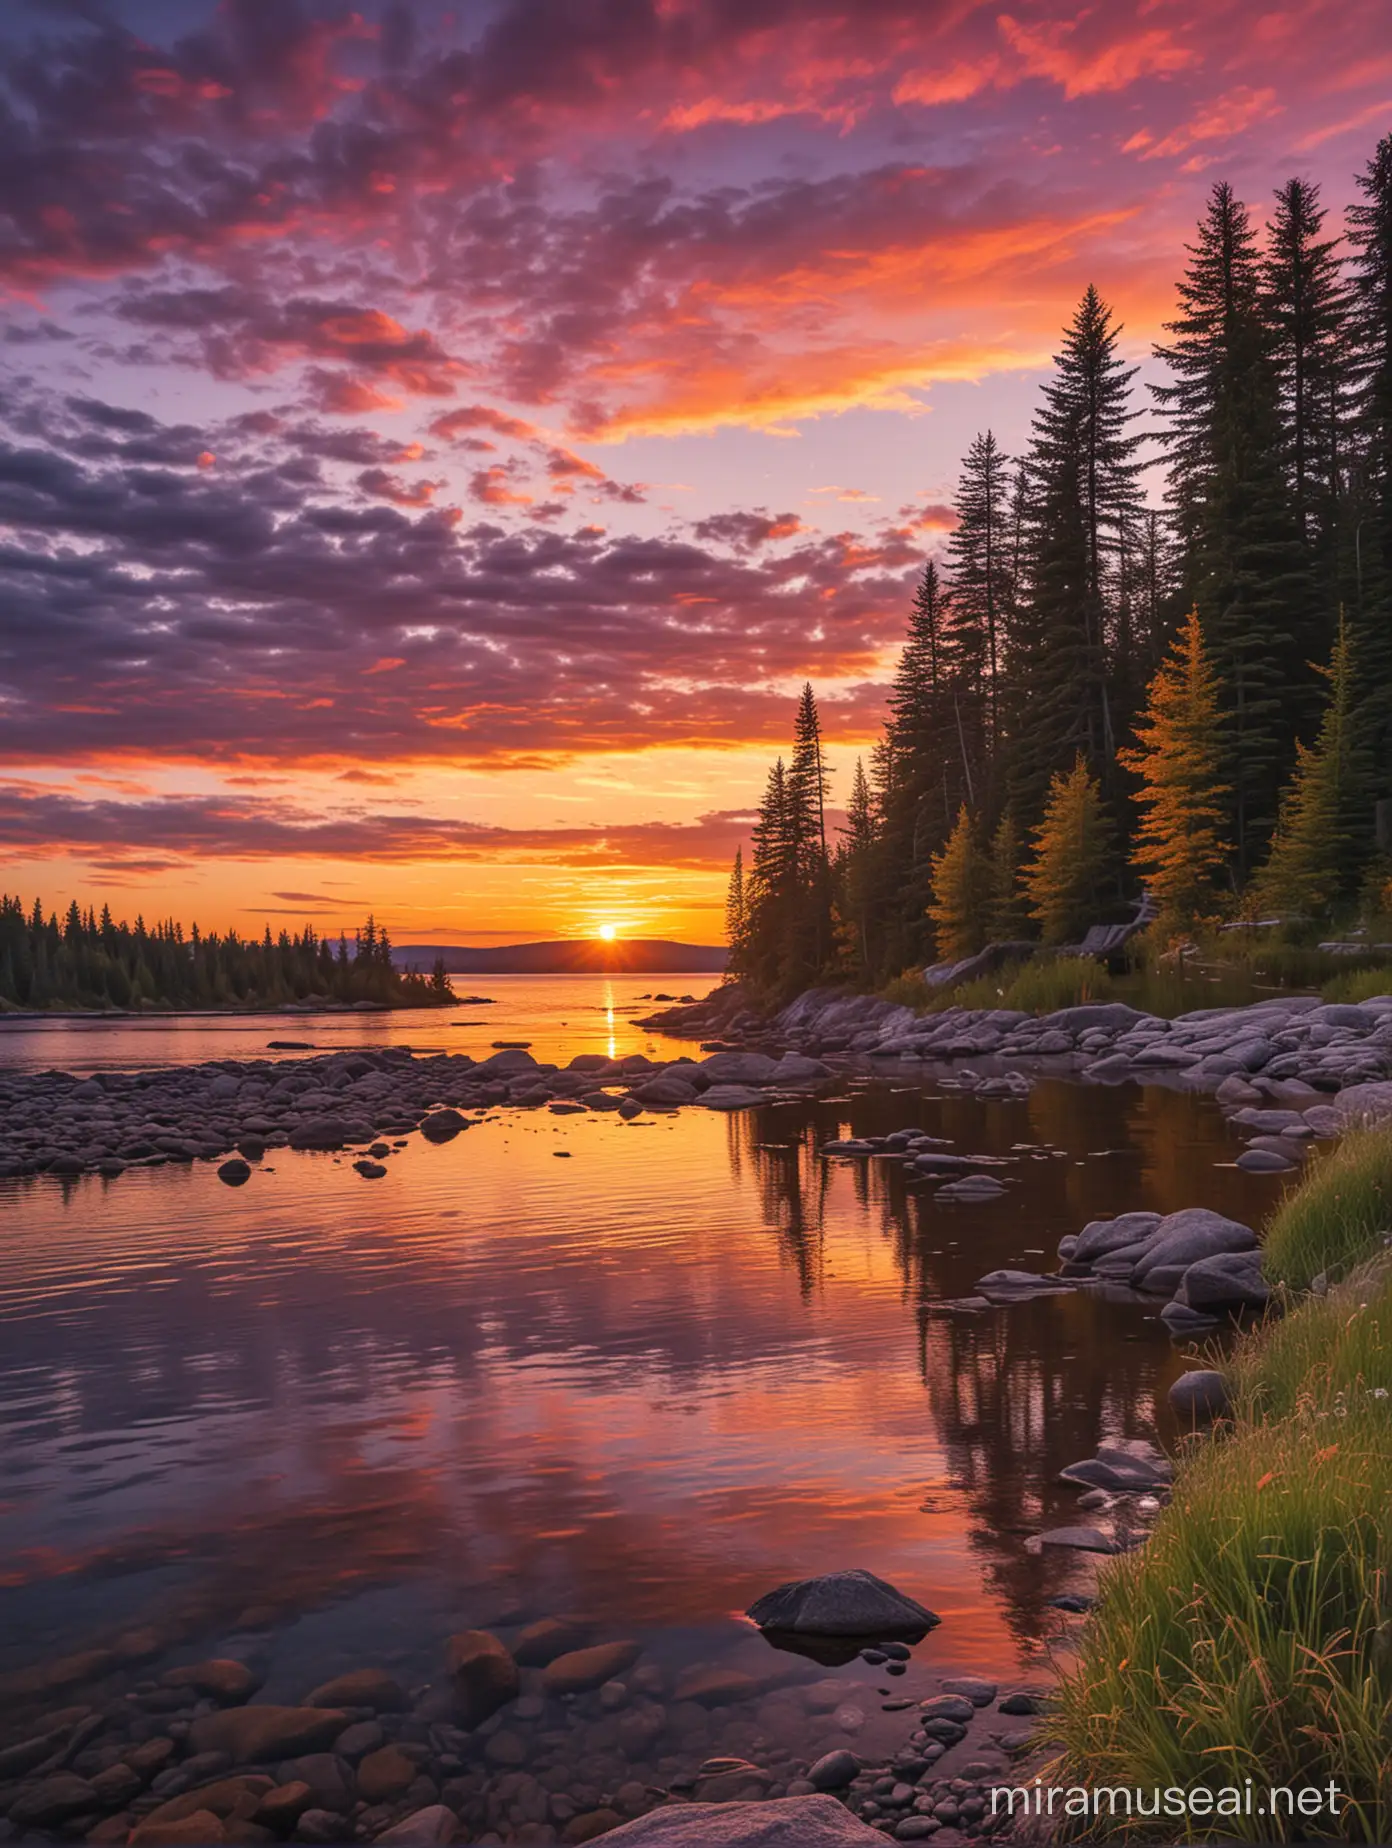 a wonderful photograph from a sunet in Canada, serne feelings, nostalgic vibes, wonderful colors